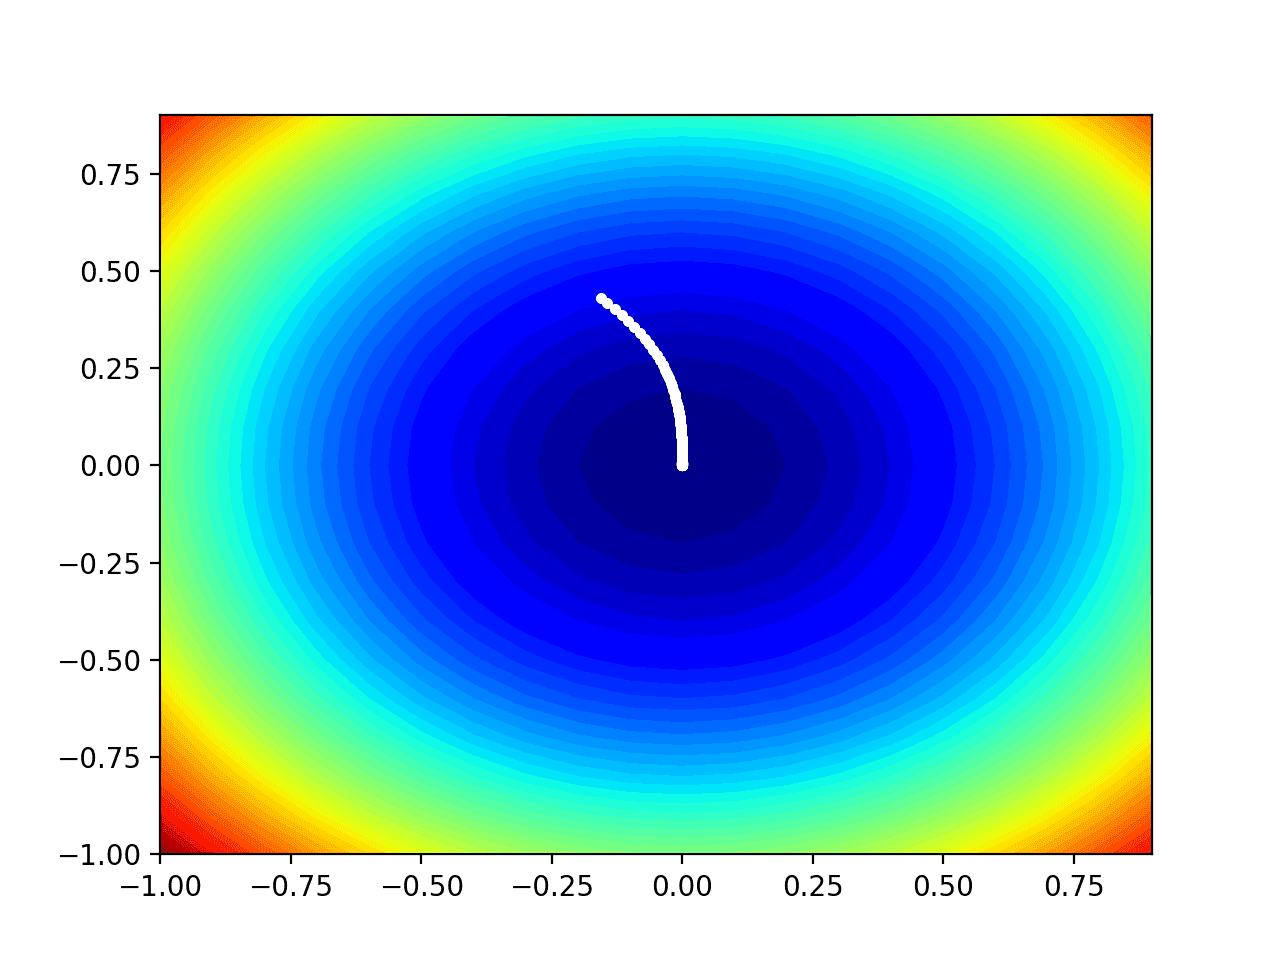 Contour Plot of the Test Objective Function With Adadelta Search Results Shown